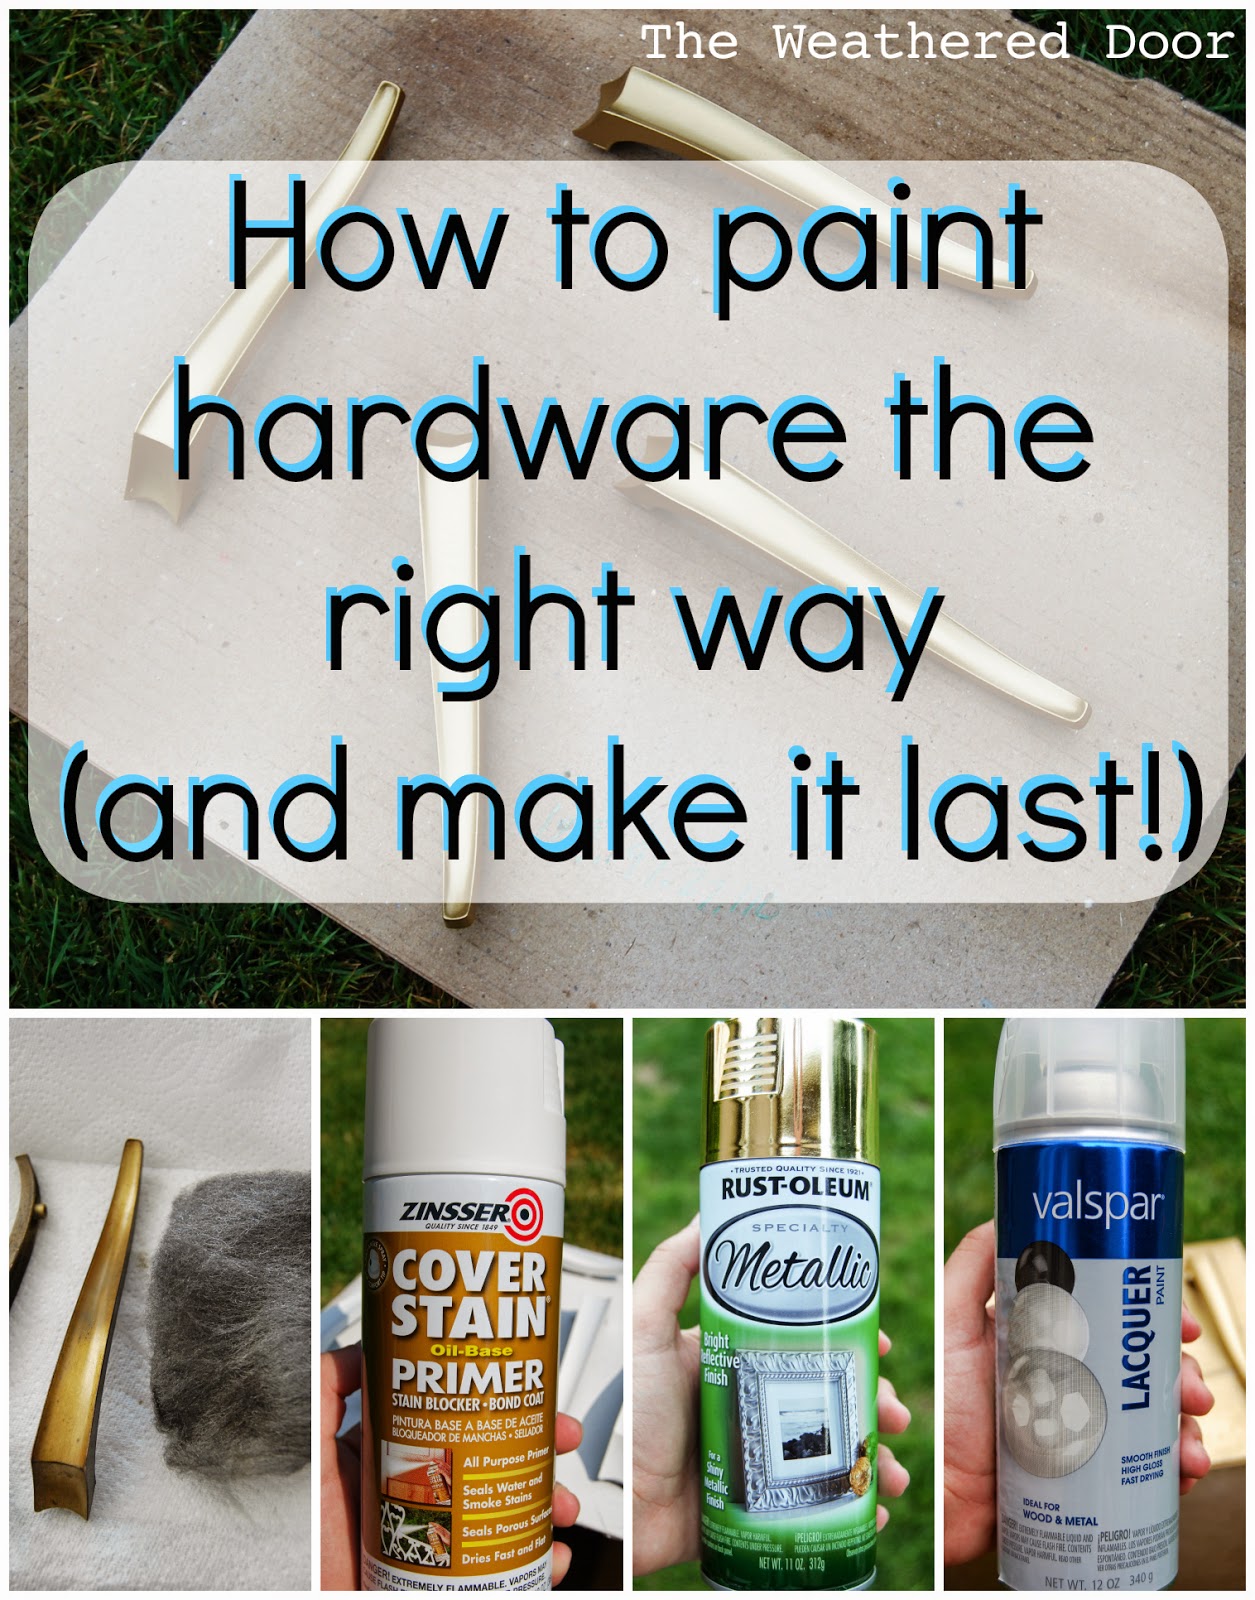 How To Paint Hardware And Make It Last, Spray Paint Cabinet Hardware Gold